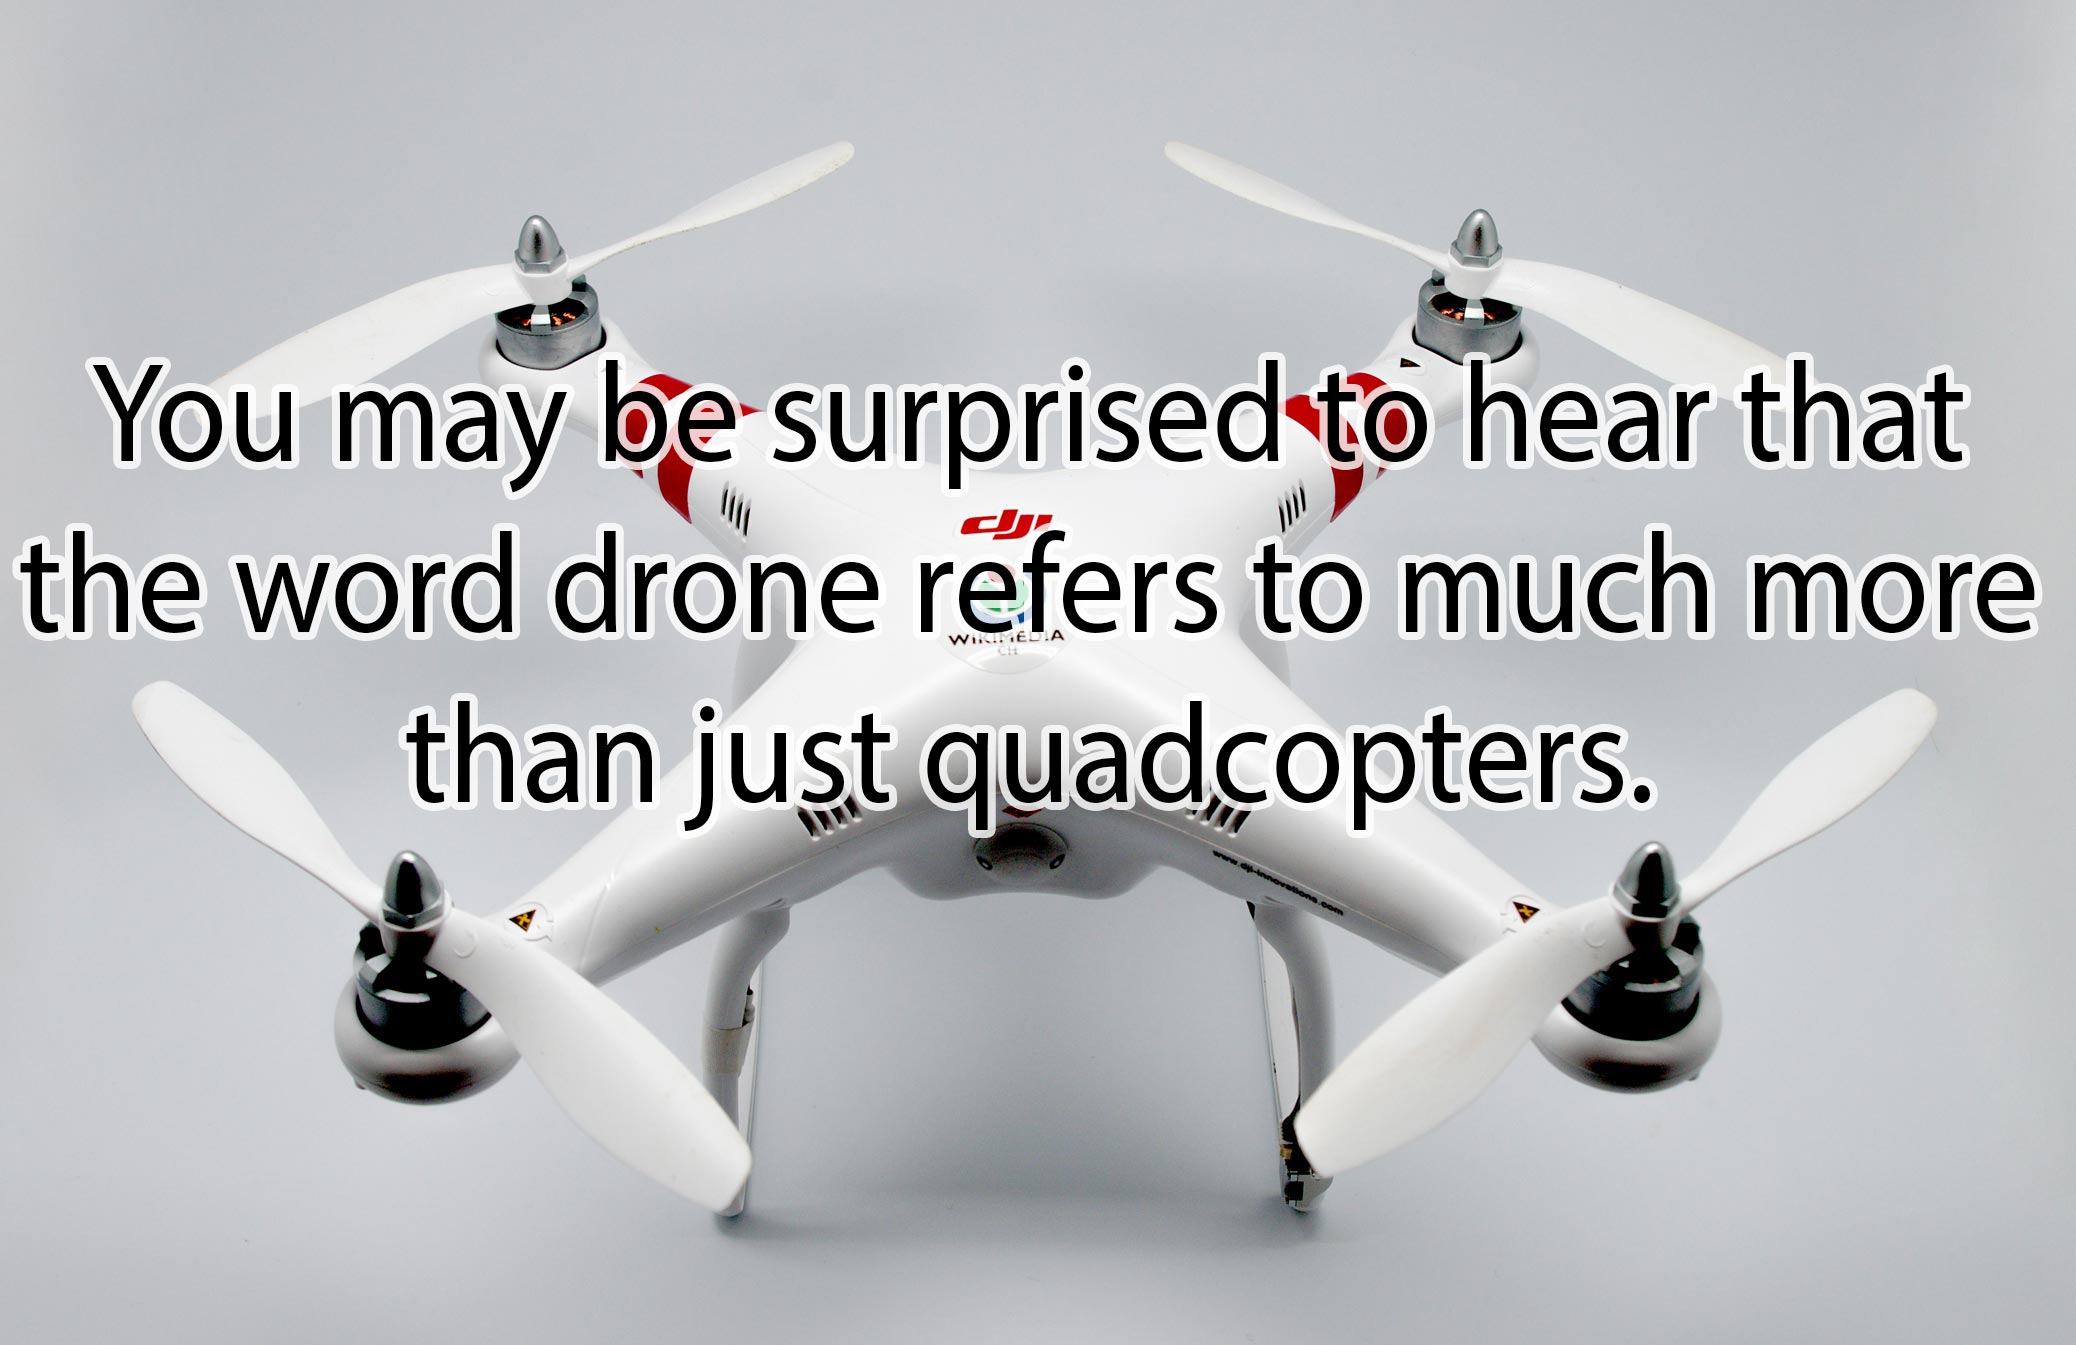 You may be surprised to hear that the word drone refers to much more than just quadcopters.